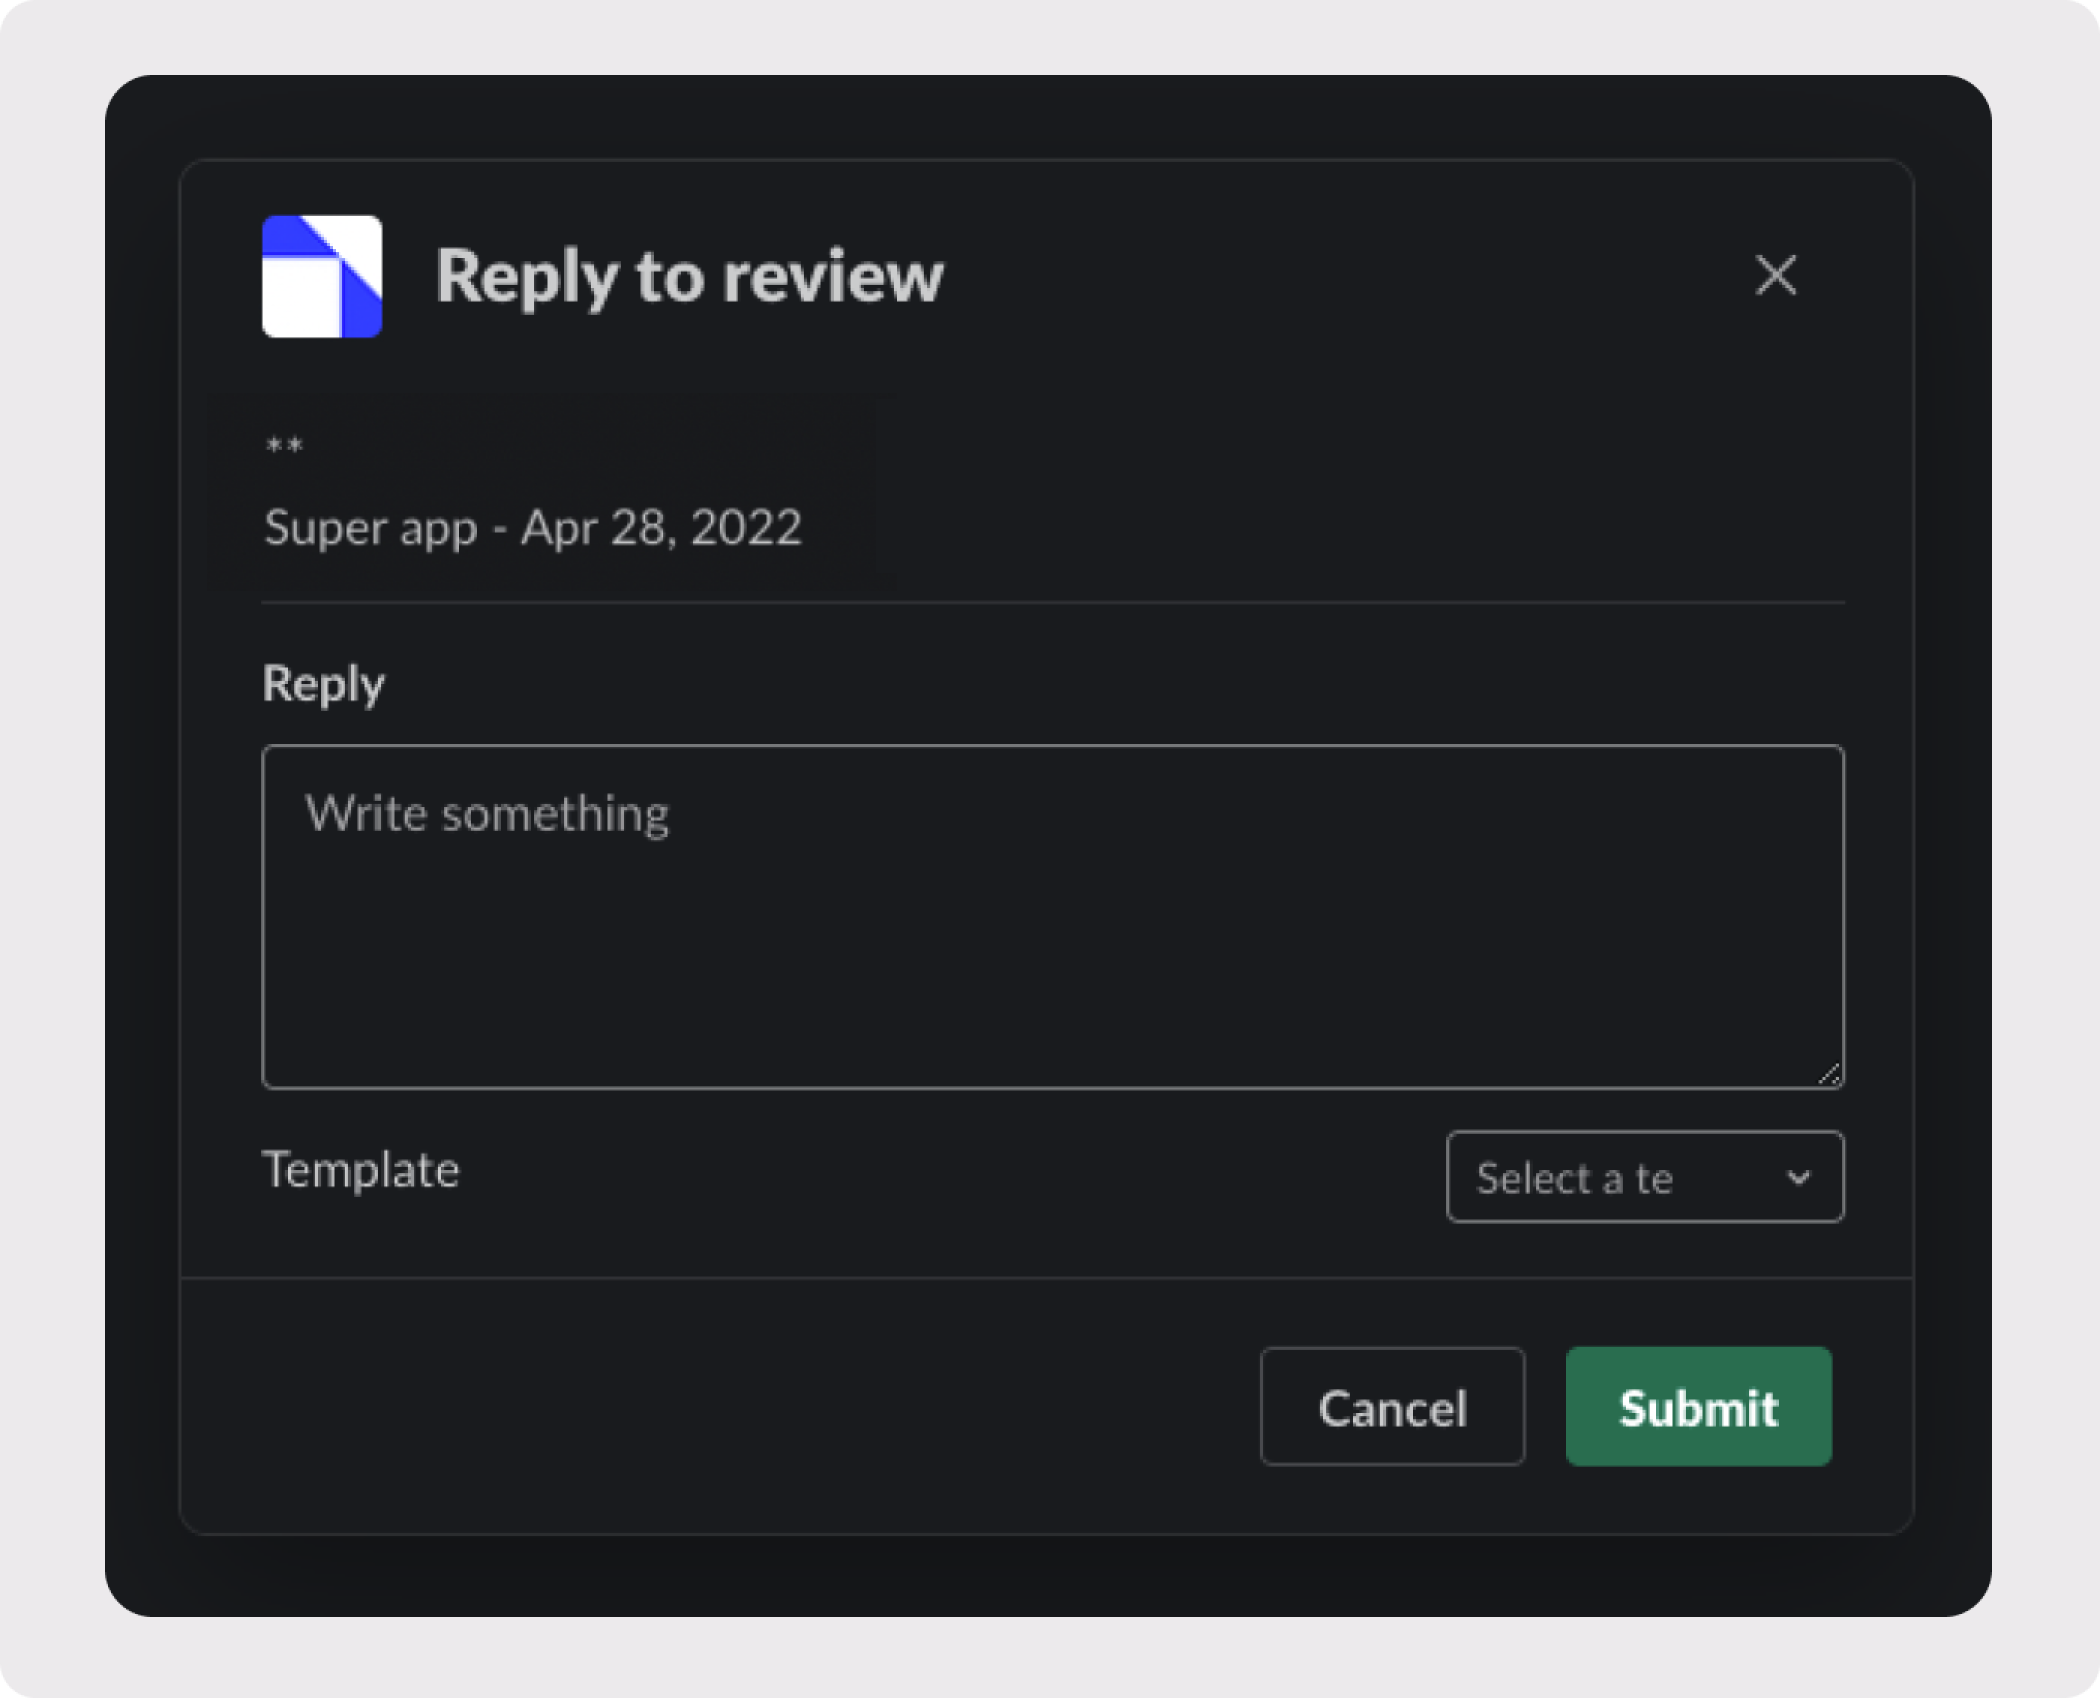 You can Reply to reviews or choose template for reply in Slack